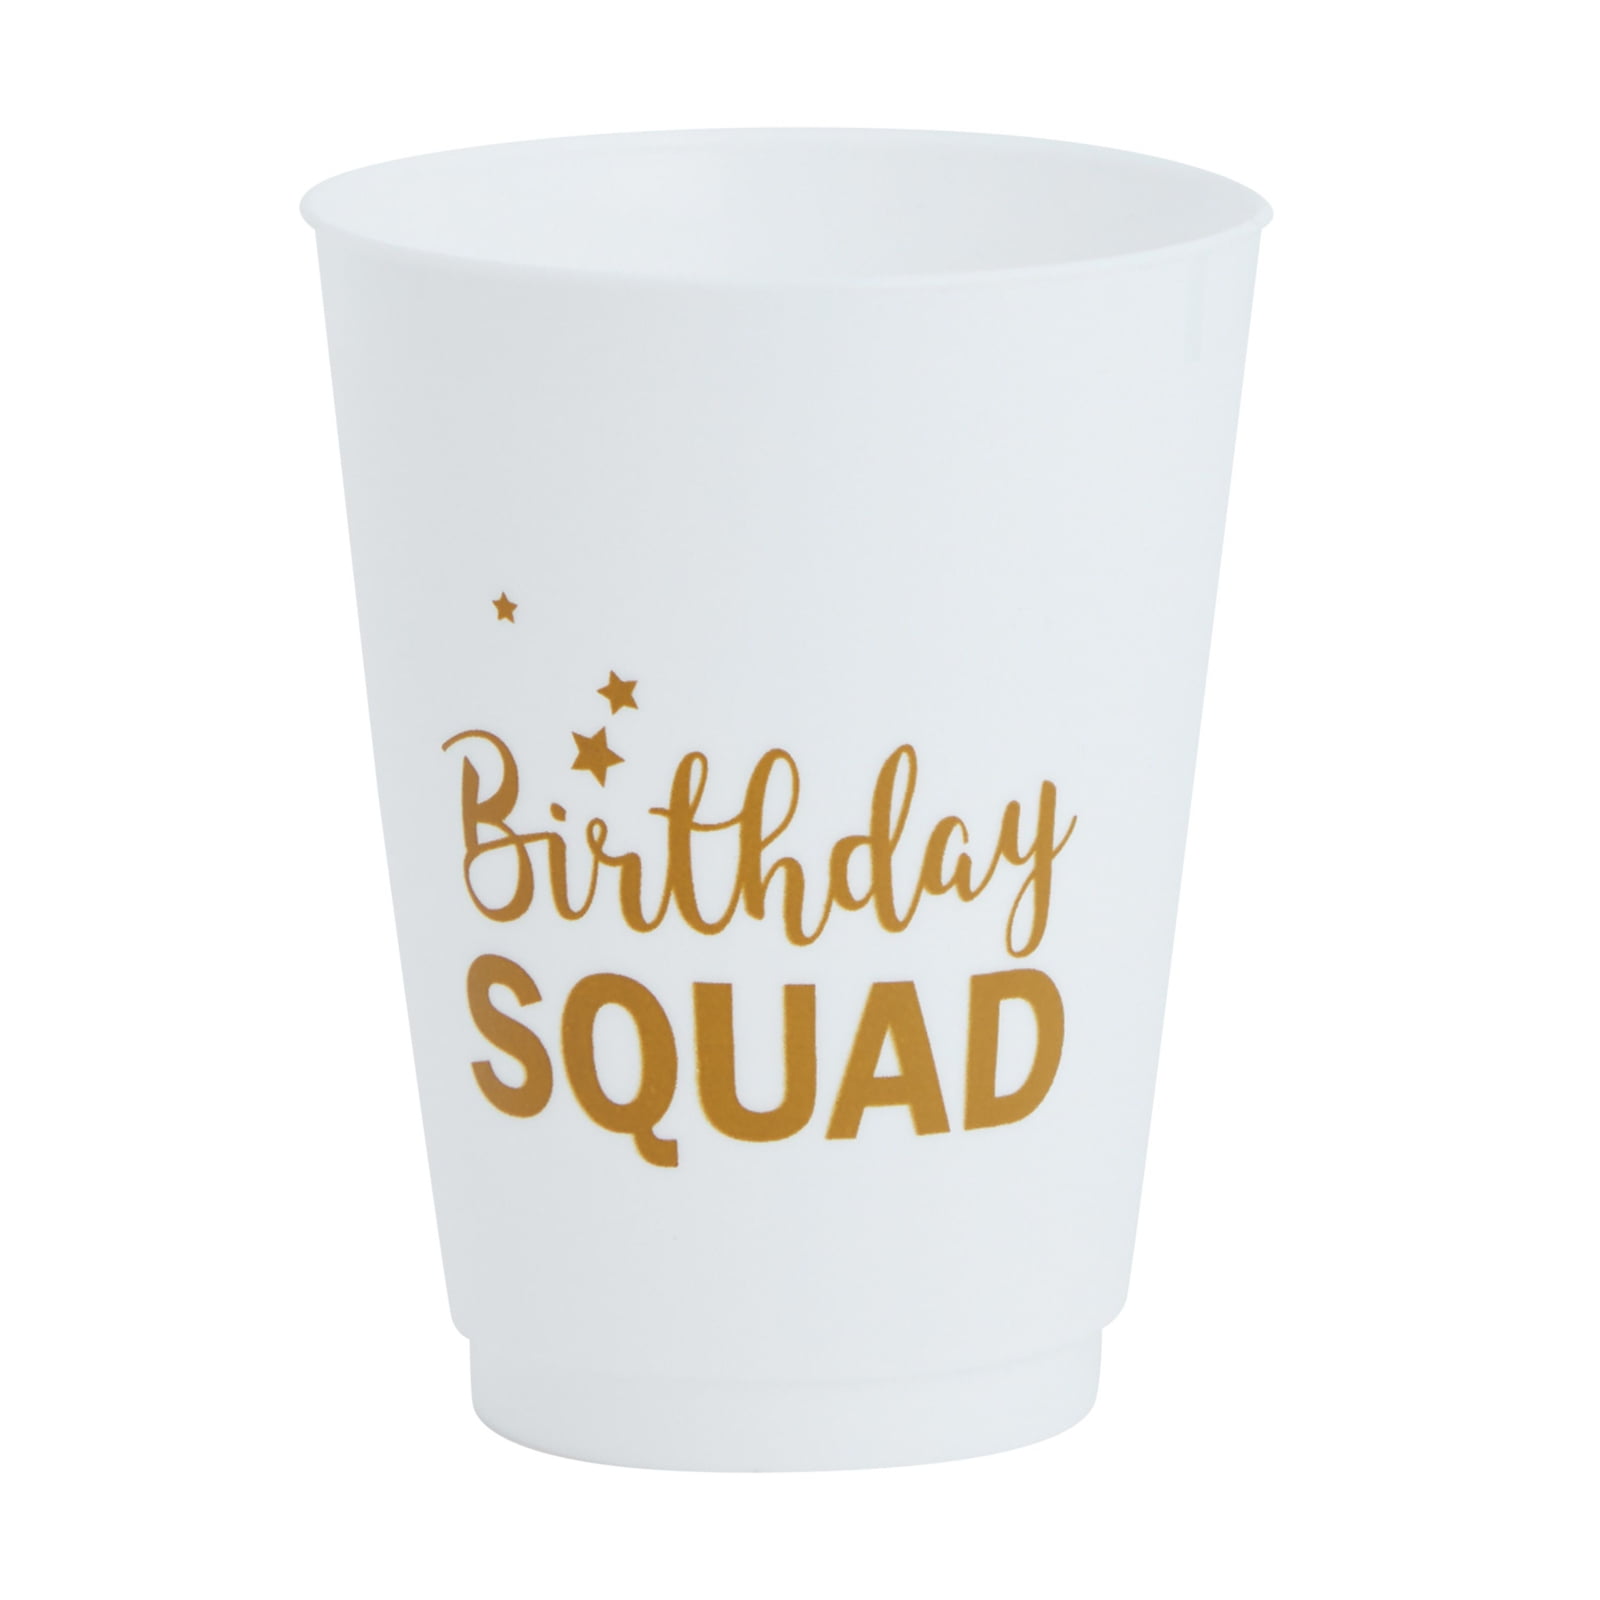 16 oz Details about   16x Reusable Plastic Cups Birthday Party Supplies Birthday Squad Design 